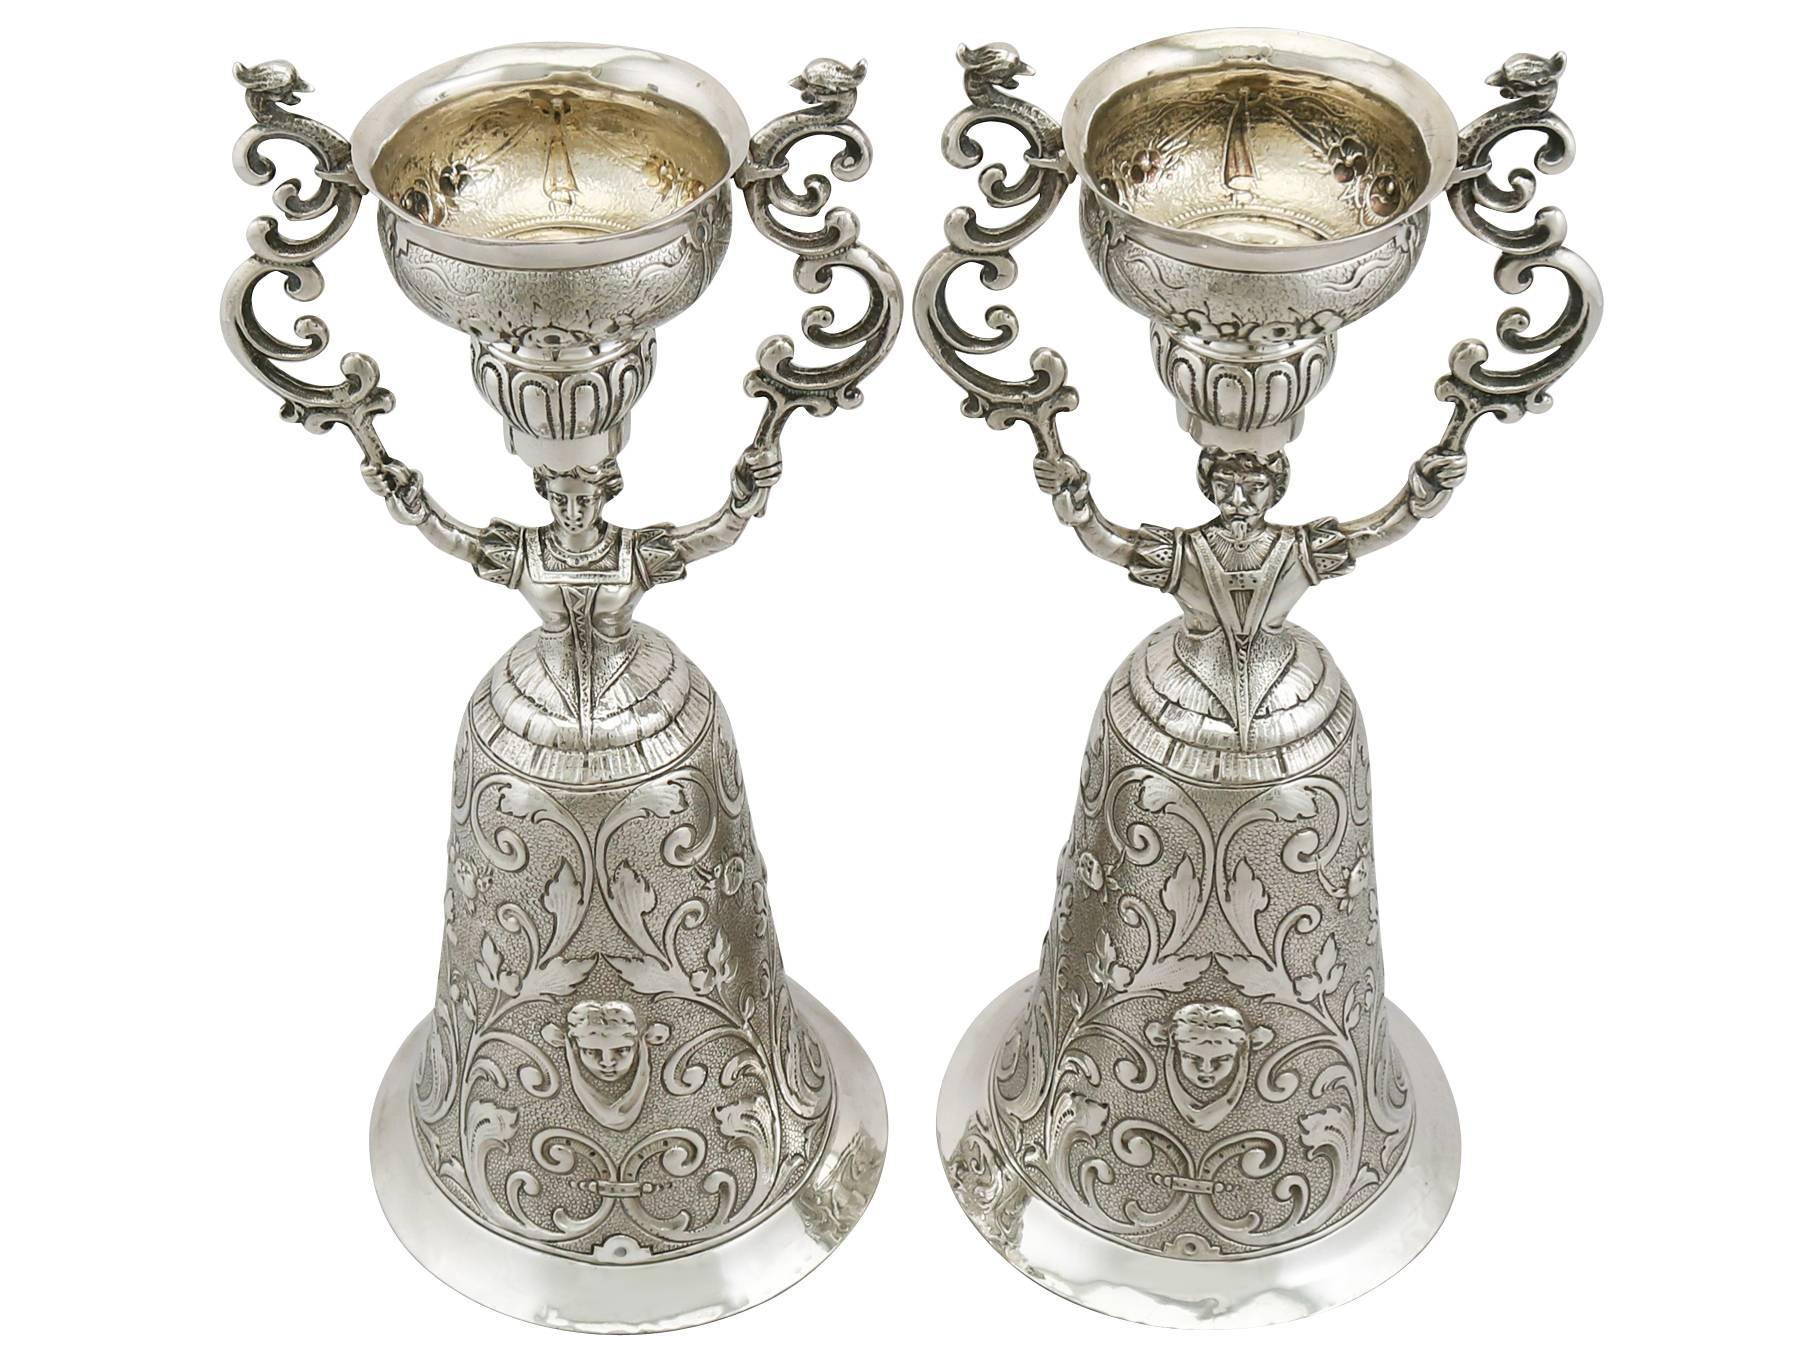 An exceptional, fine and impressive pair of antique Victorian sterling silver wager cups, an addition to our wine and drinks related silverware collection.

These exceptional antique Victorian sterling silver wager cups has been realistically